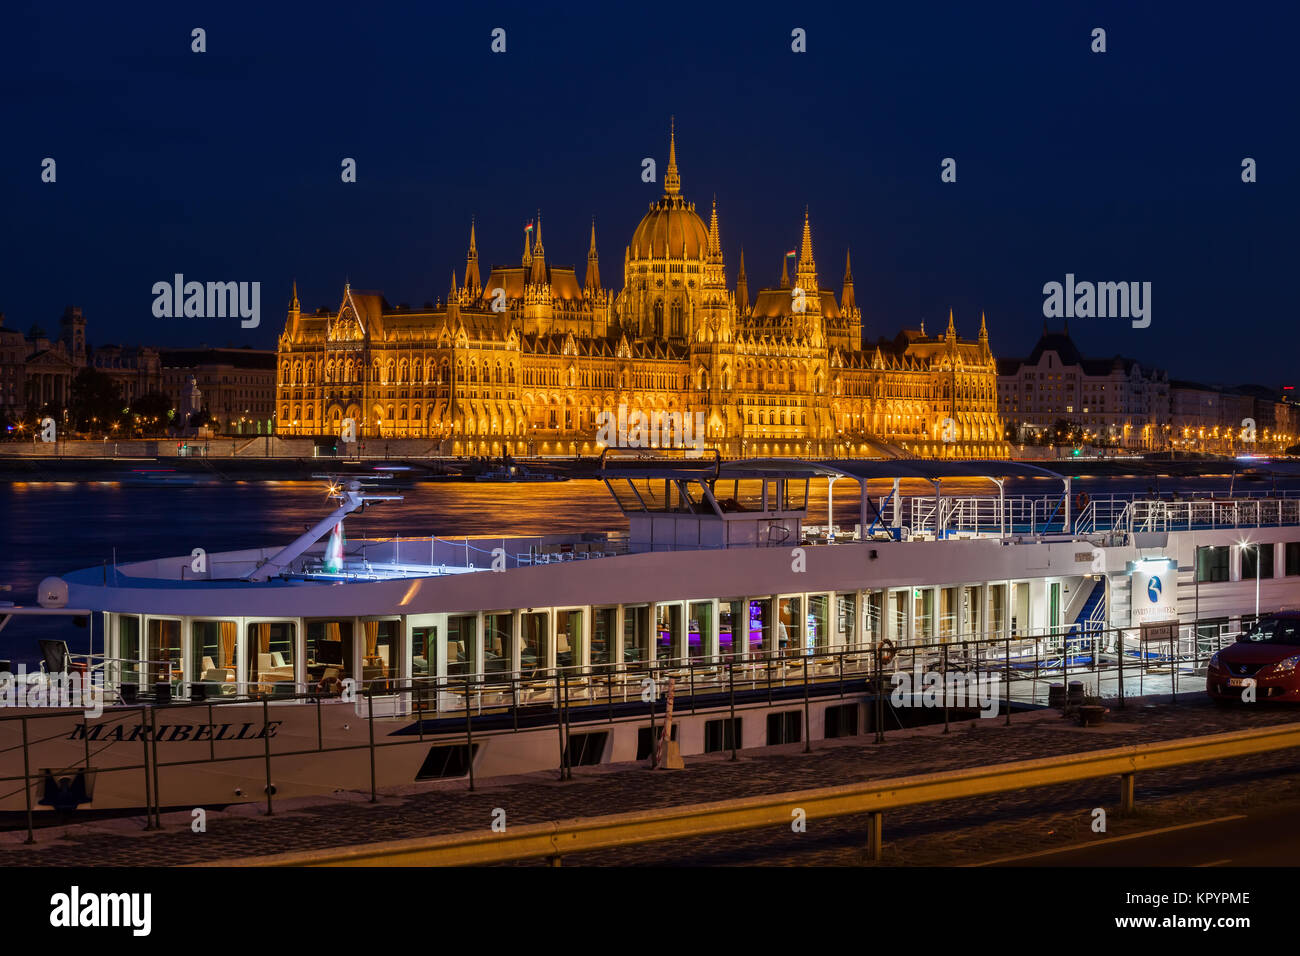 Hungary, city of Budapest, MS Maribelle OnRiver Hotel and restaurant ship with view of Hungarian Parliament Building illuminated at night Stock Photo